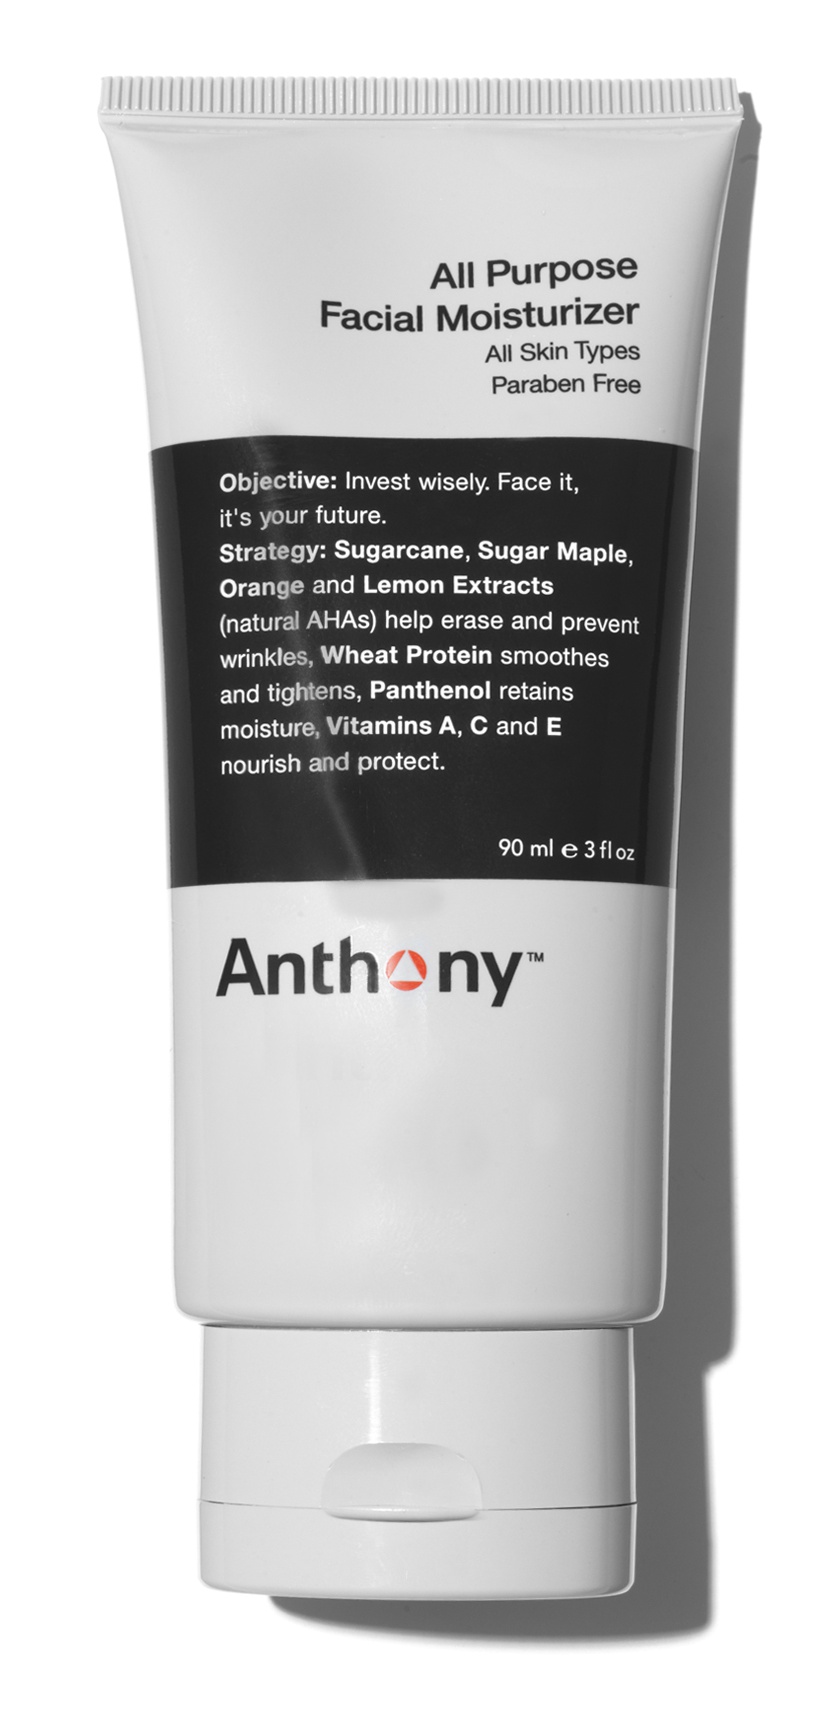 Anthony All Purpose Facial Moisturizer ingredients (Explained)